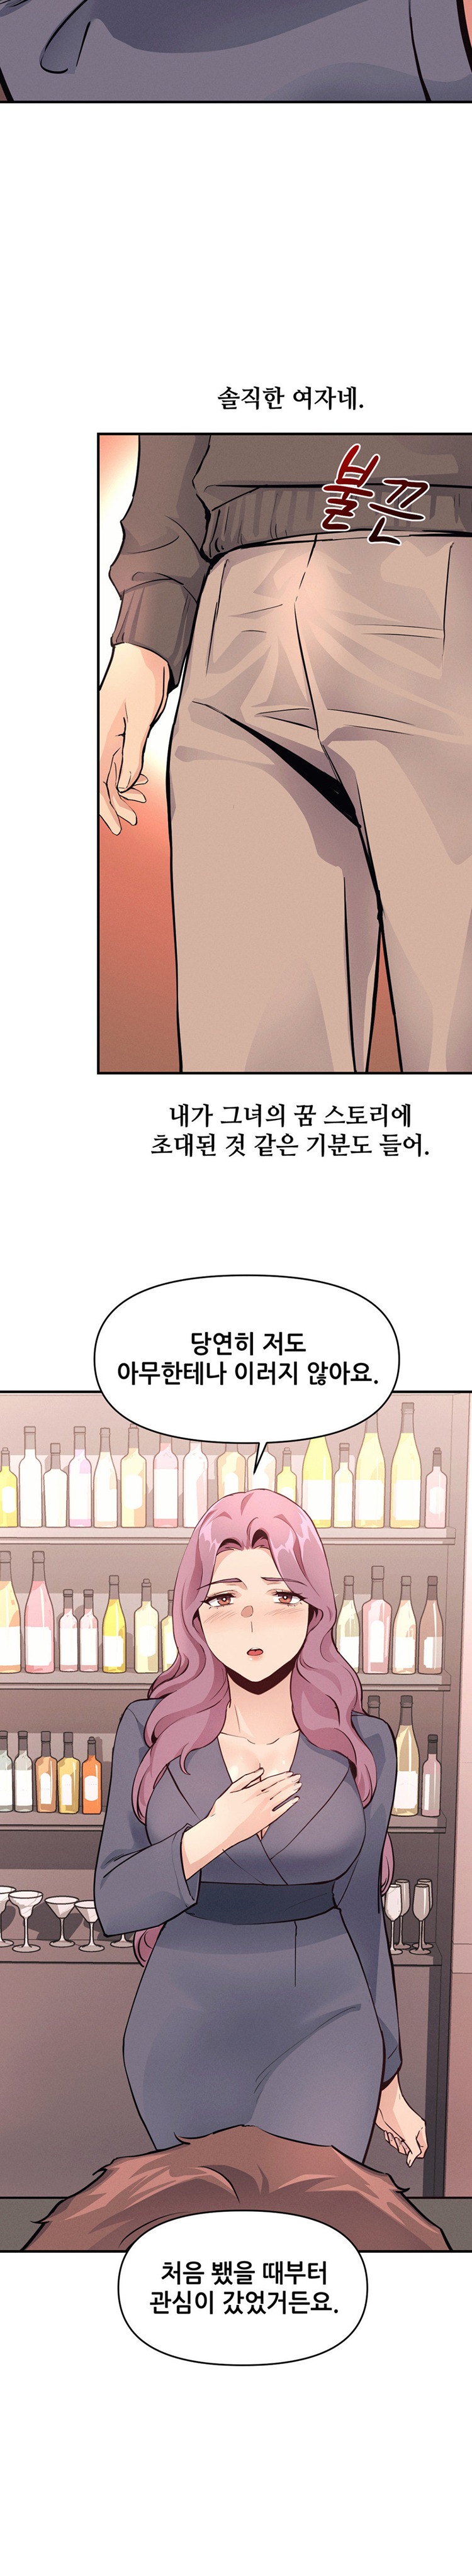 My Life is a Piece of Cake Raw - Chapter 18 Page 5